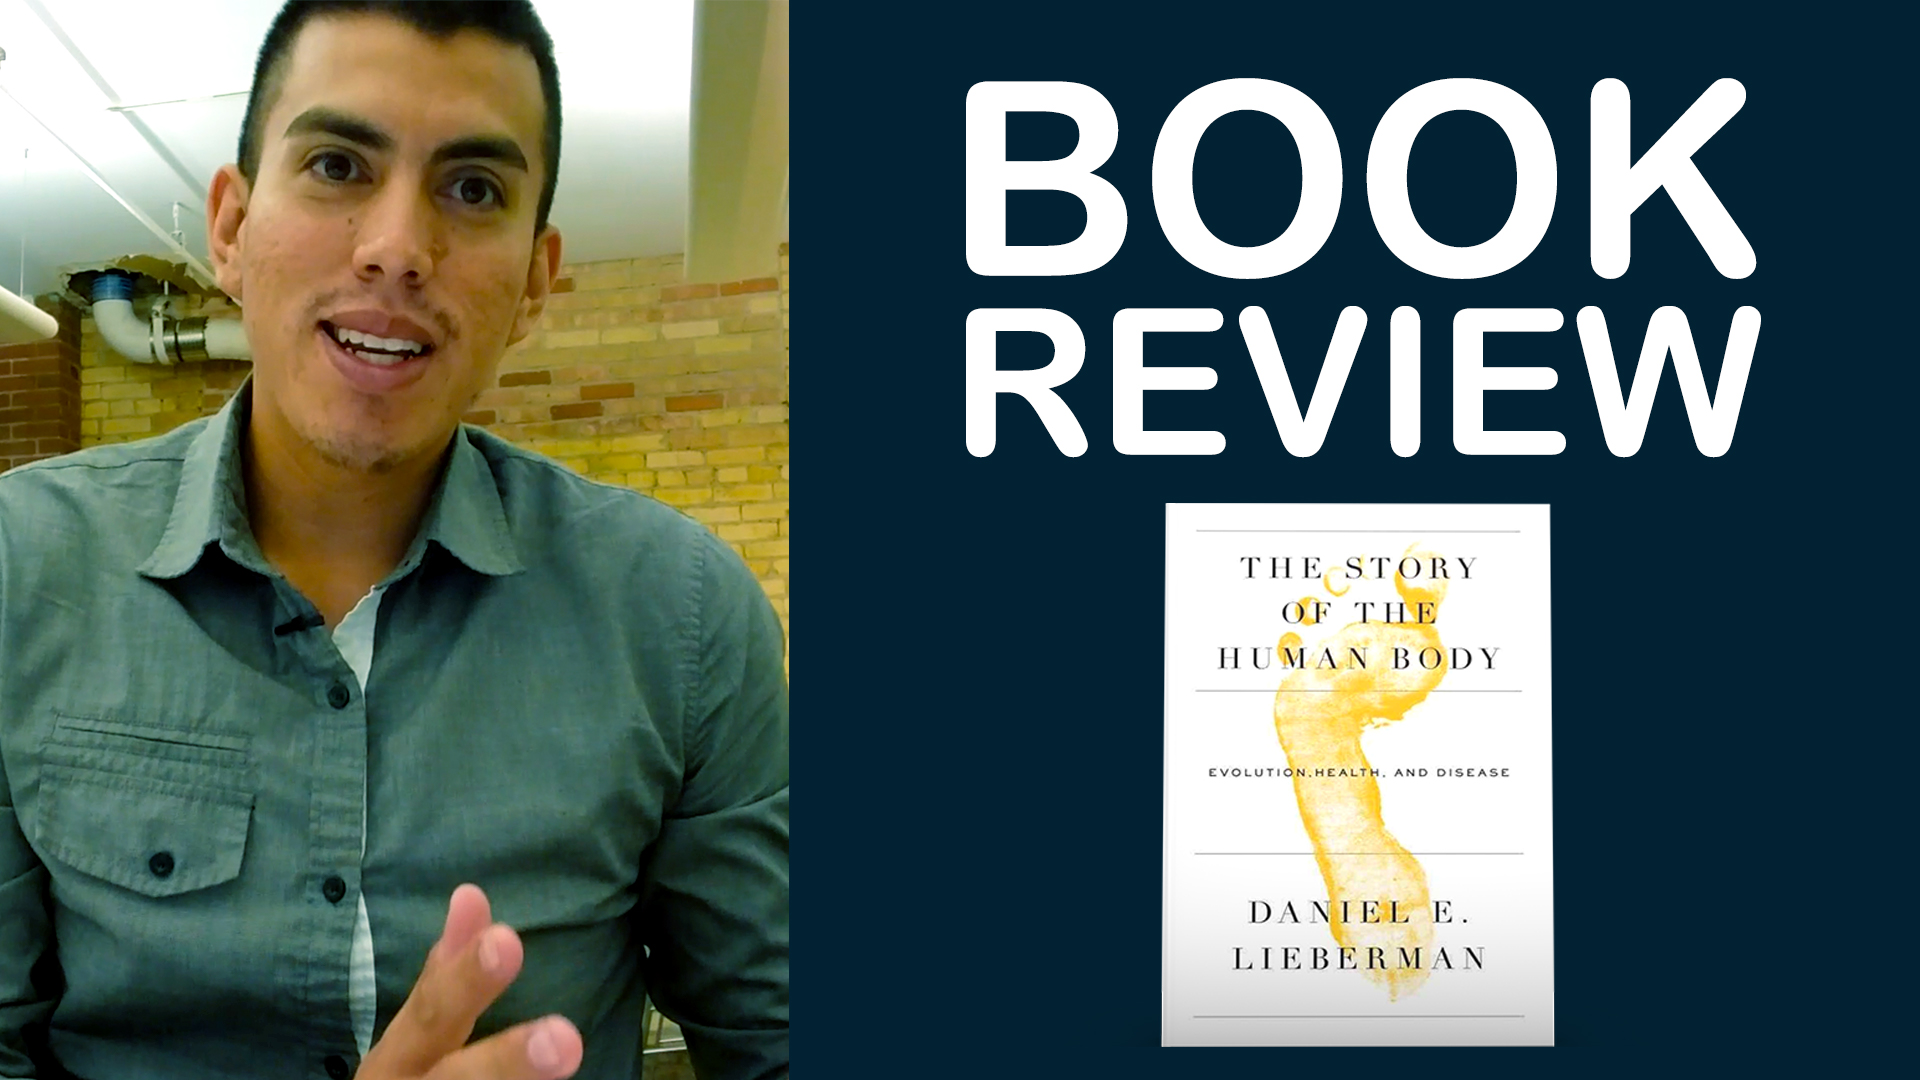 the story of the human body evolution, health, and disease by daniel e. lieberman